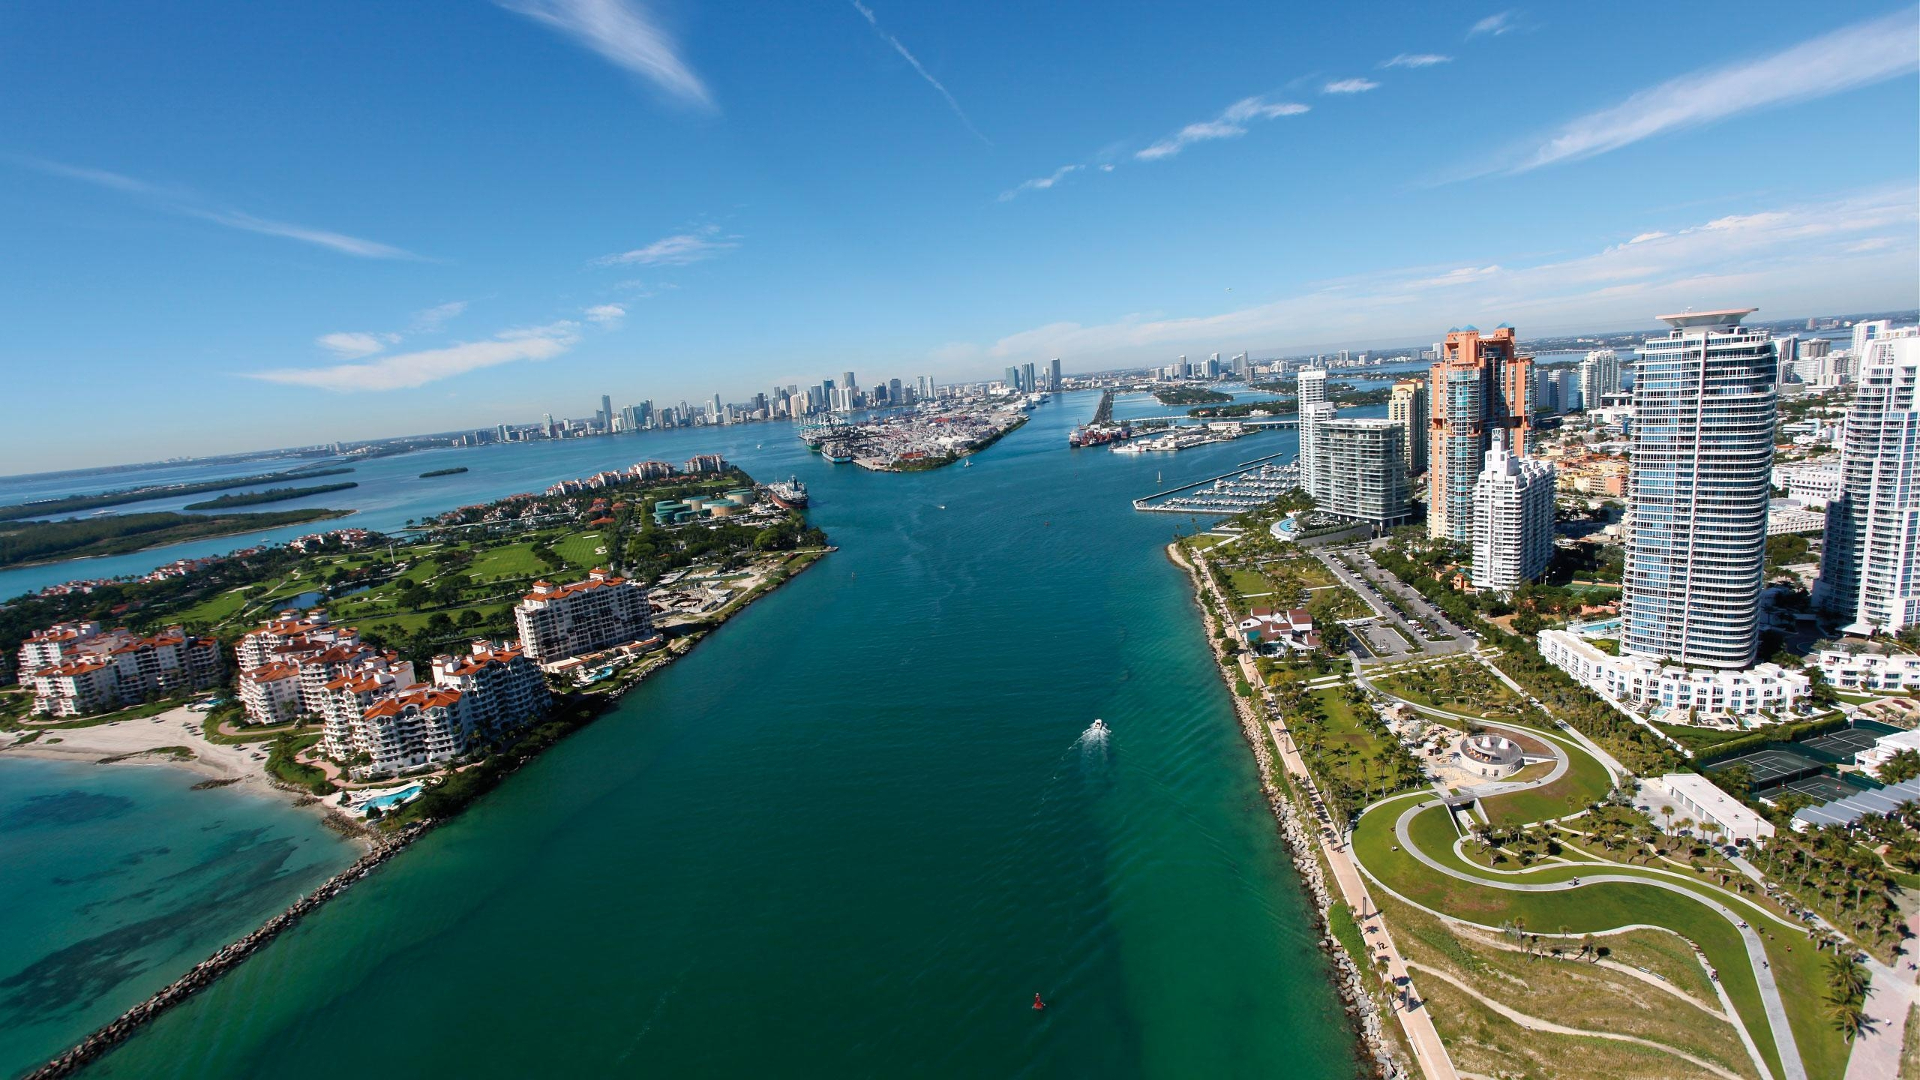 Man Made Miami Waterway Cityscape Aerial City 1920x1080